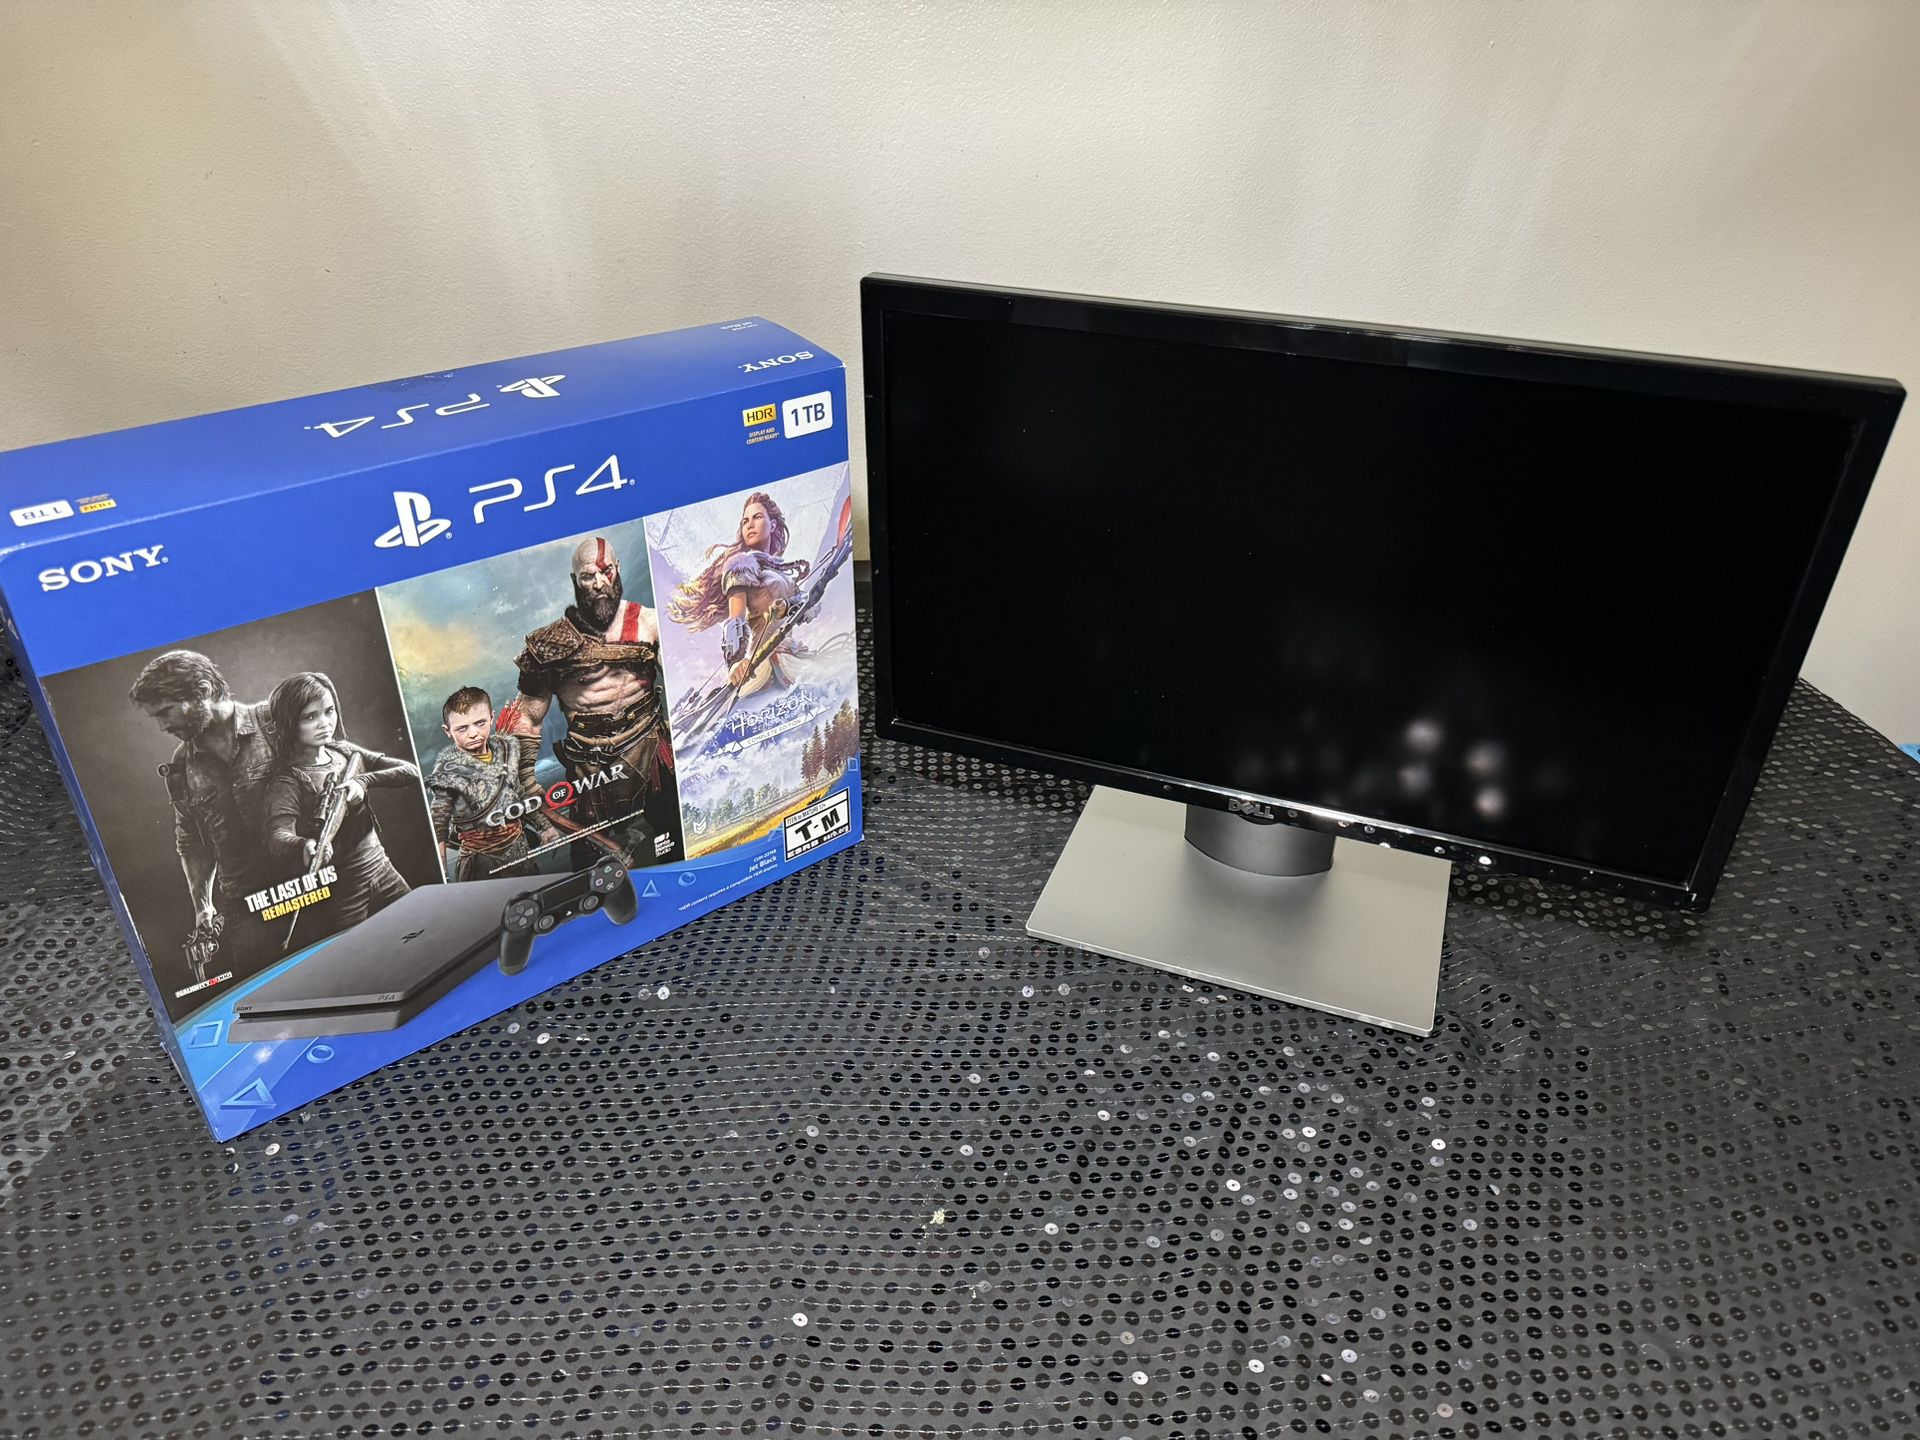 1 TB Ps4 + Monitor - Controller - Wall Mount Combo